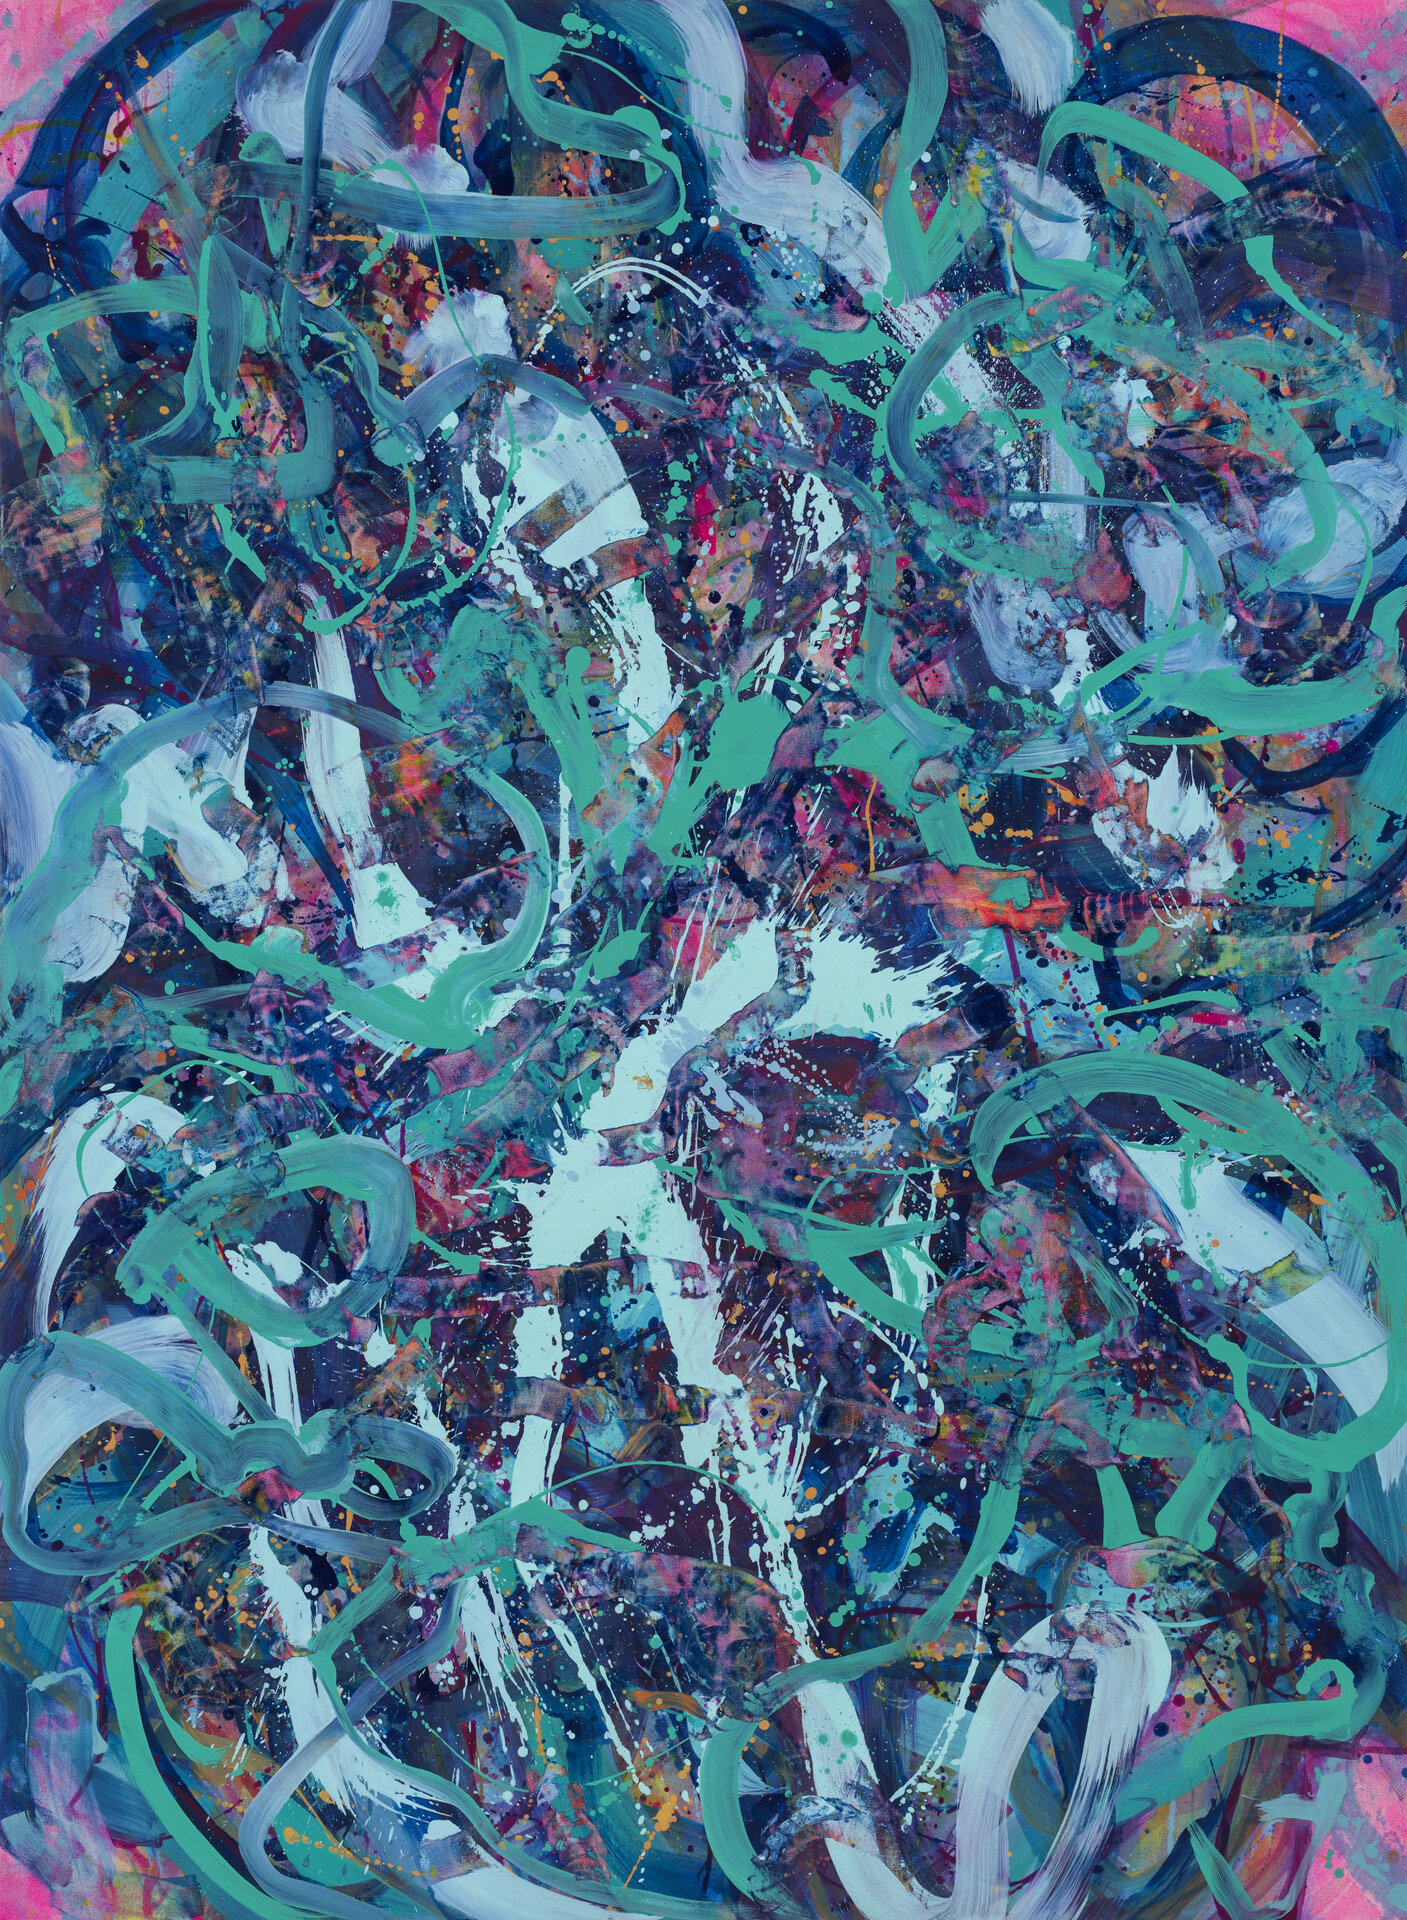  Untitled wax VI  (emerald green, cobalt turquoise)  2019  pigment-oil-wax on canvas  199 x 146cm 